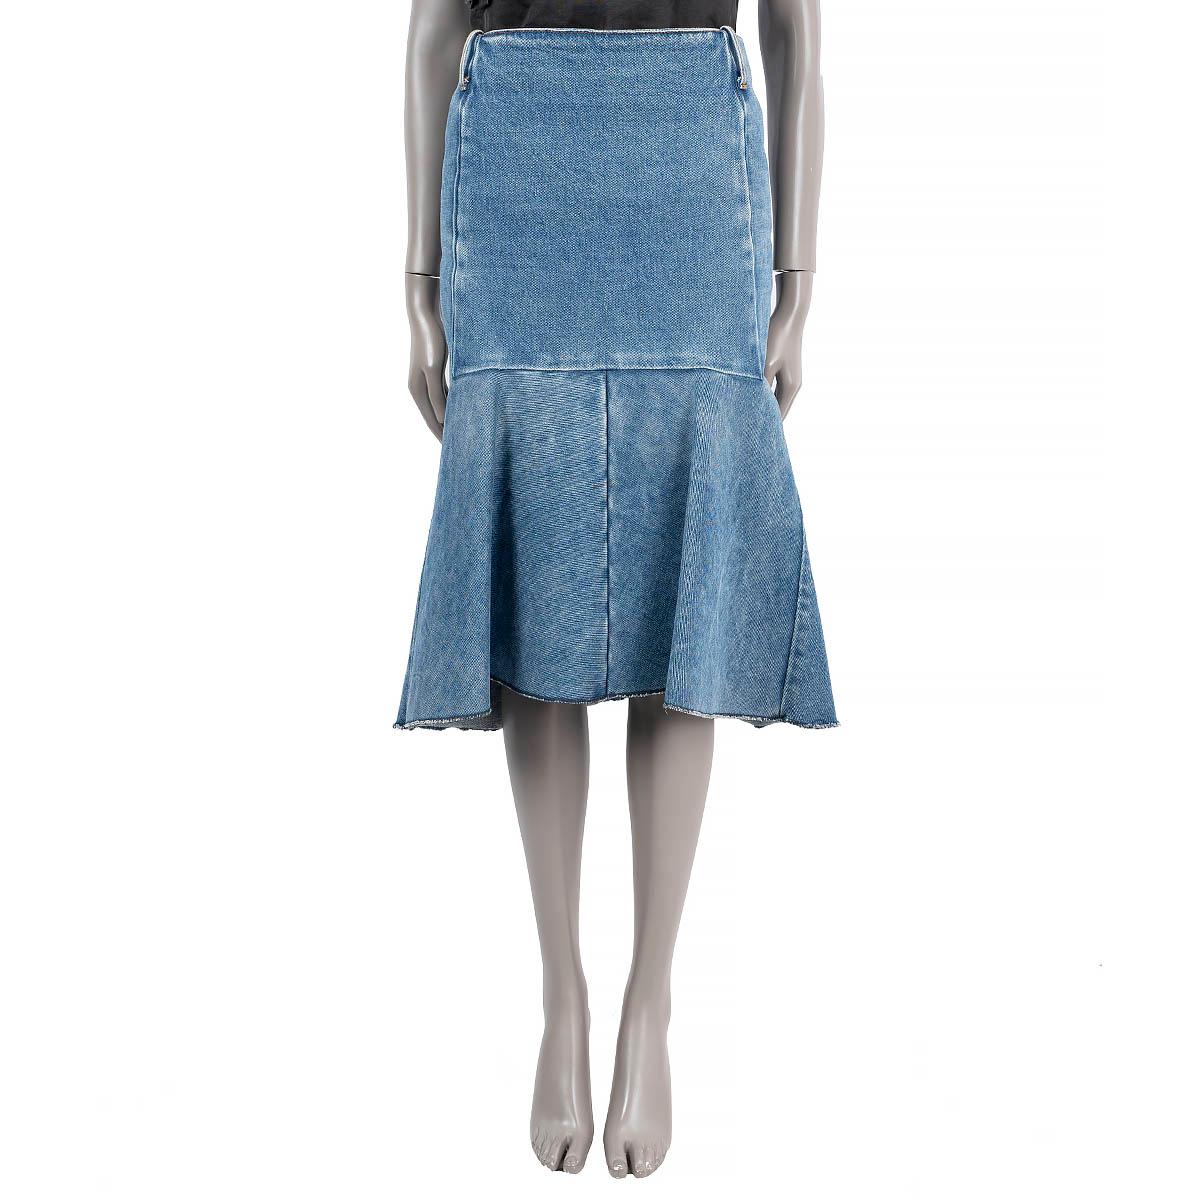 100% authentic Balenciaga panelled high-waisted skirt in washed blue denim cotton (100%). Features a a fluted silhouette. Closes with a zipper in the back. Unlined. Has been worn and is in excellent condition.

2019